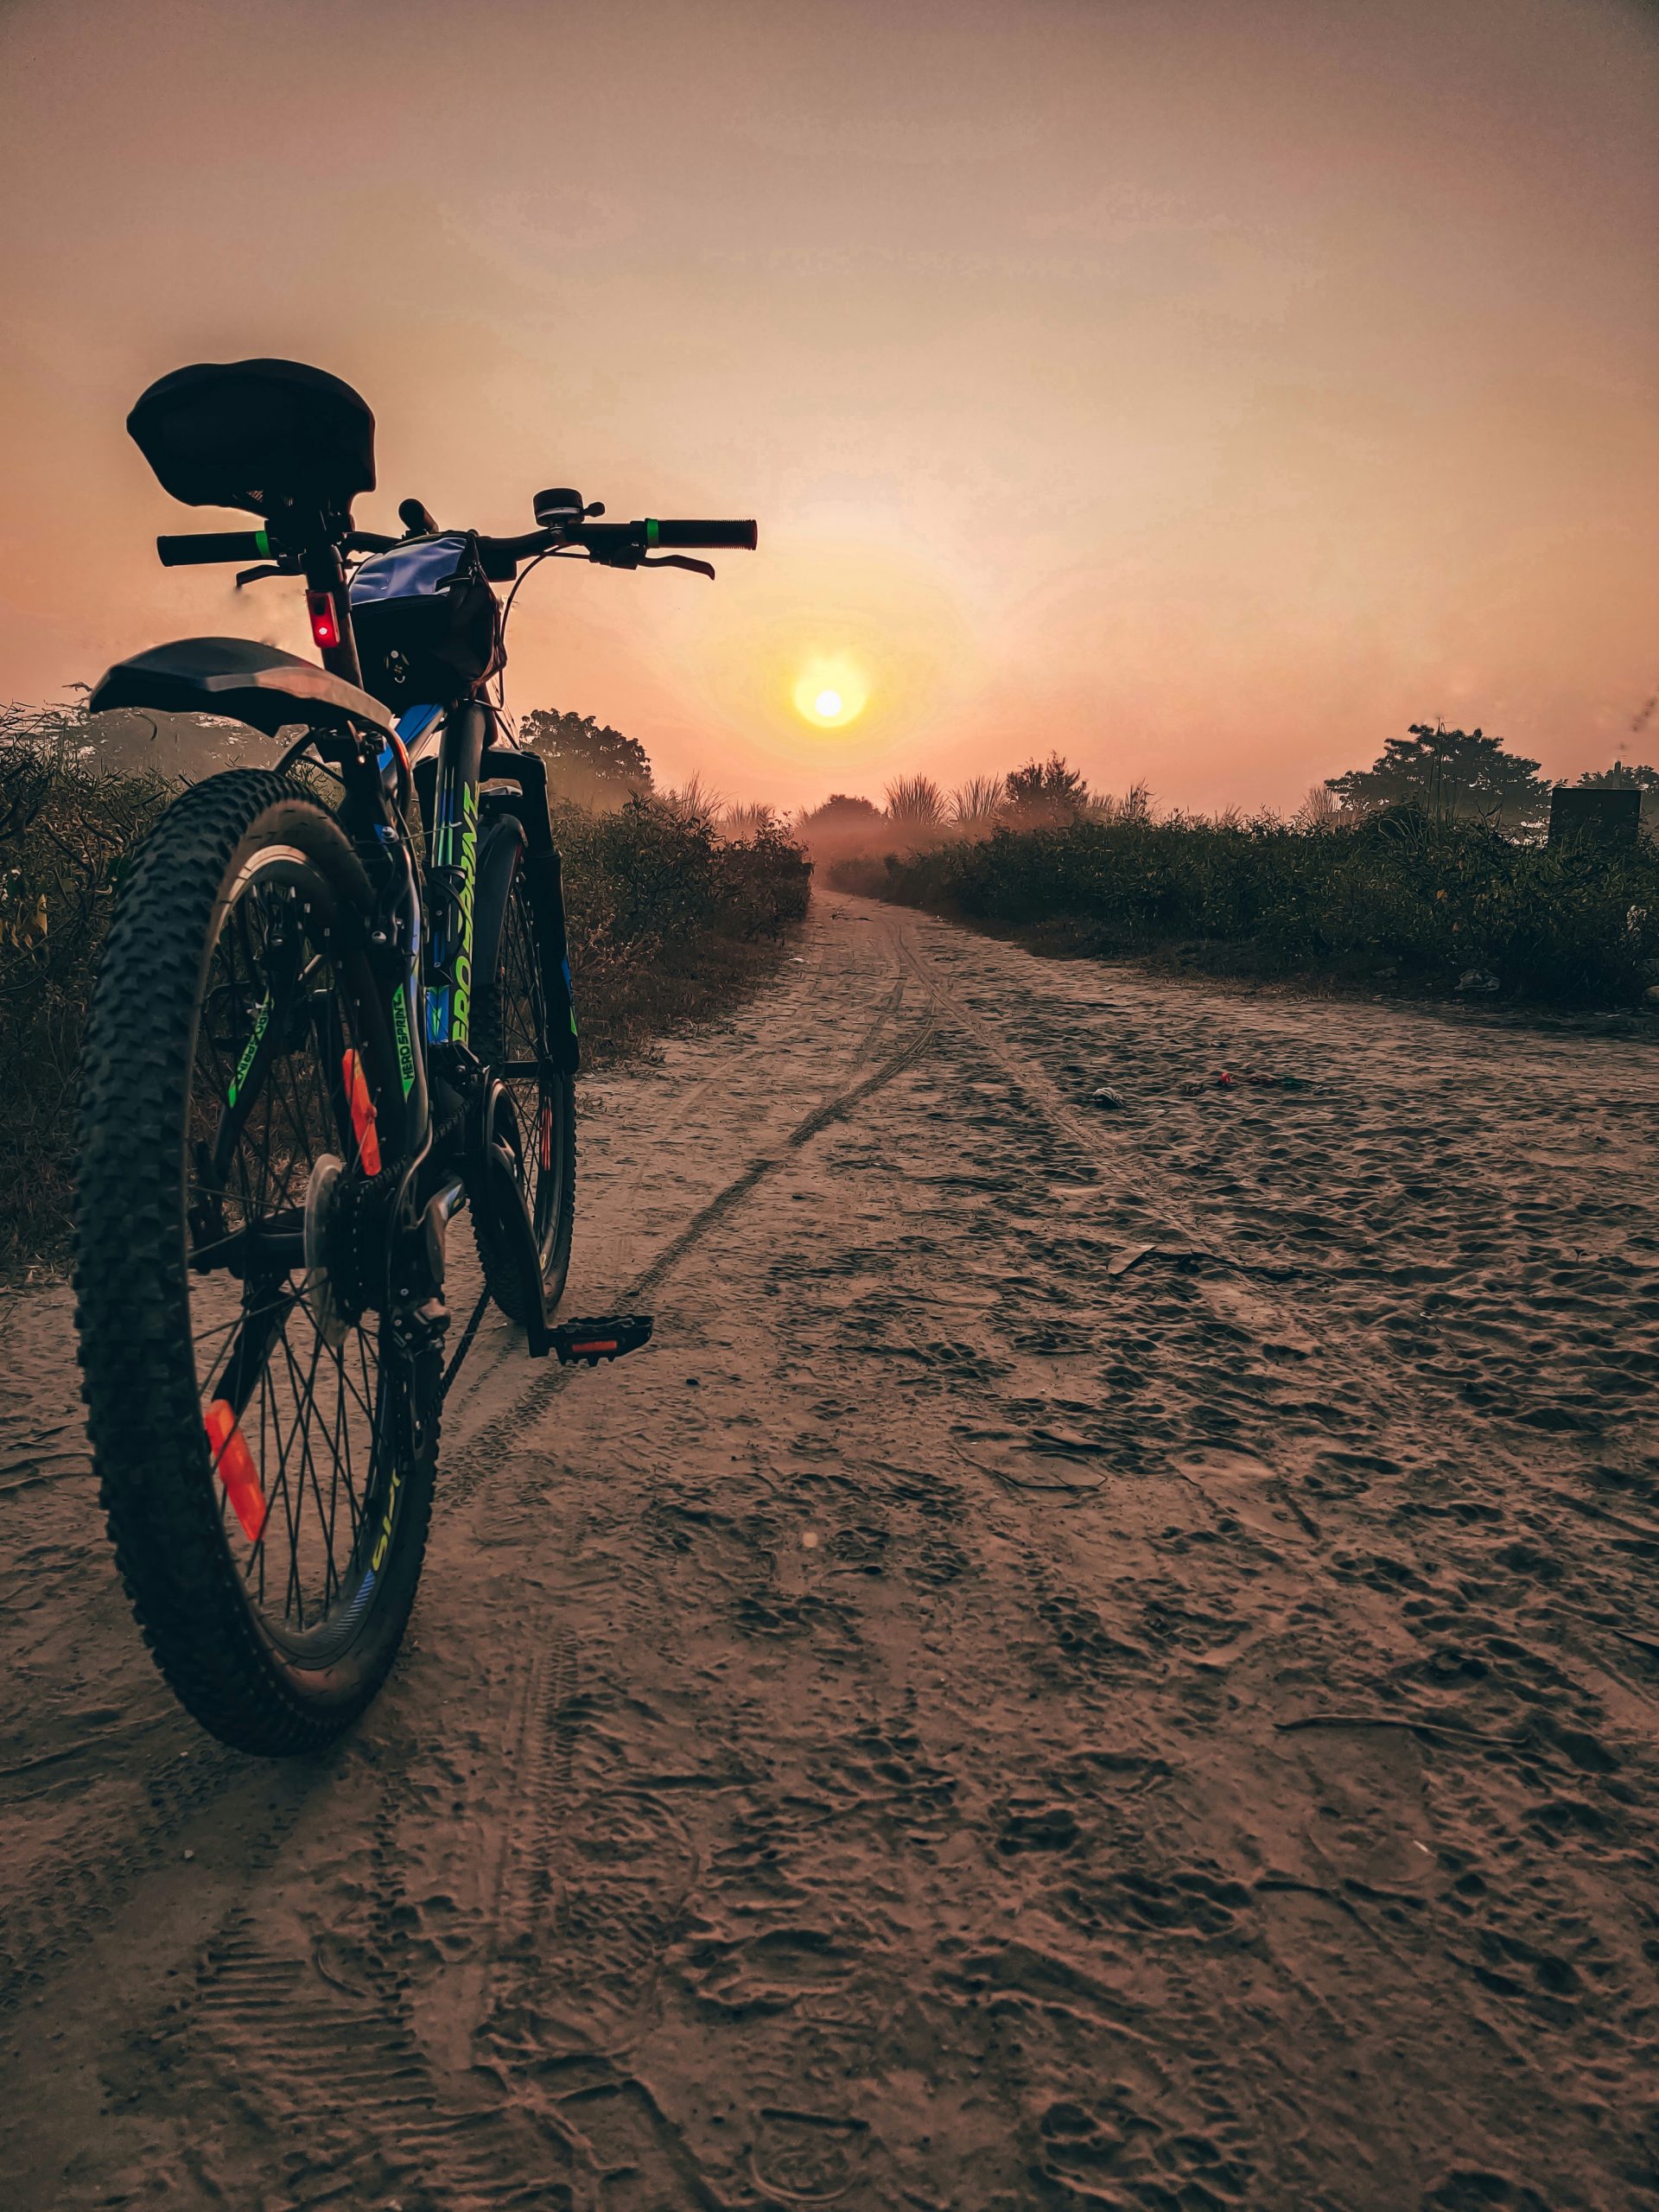 A bicycle on a dirt road